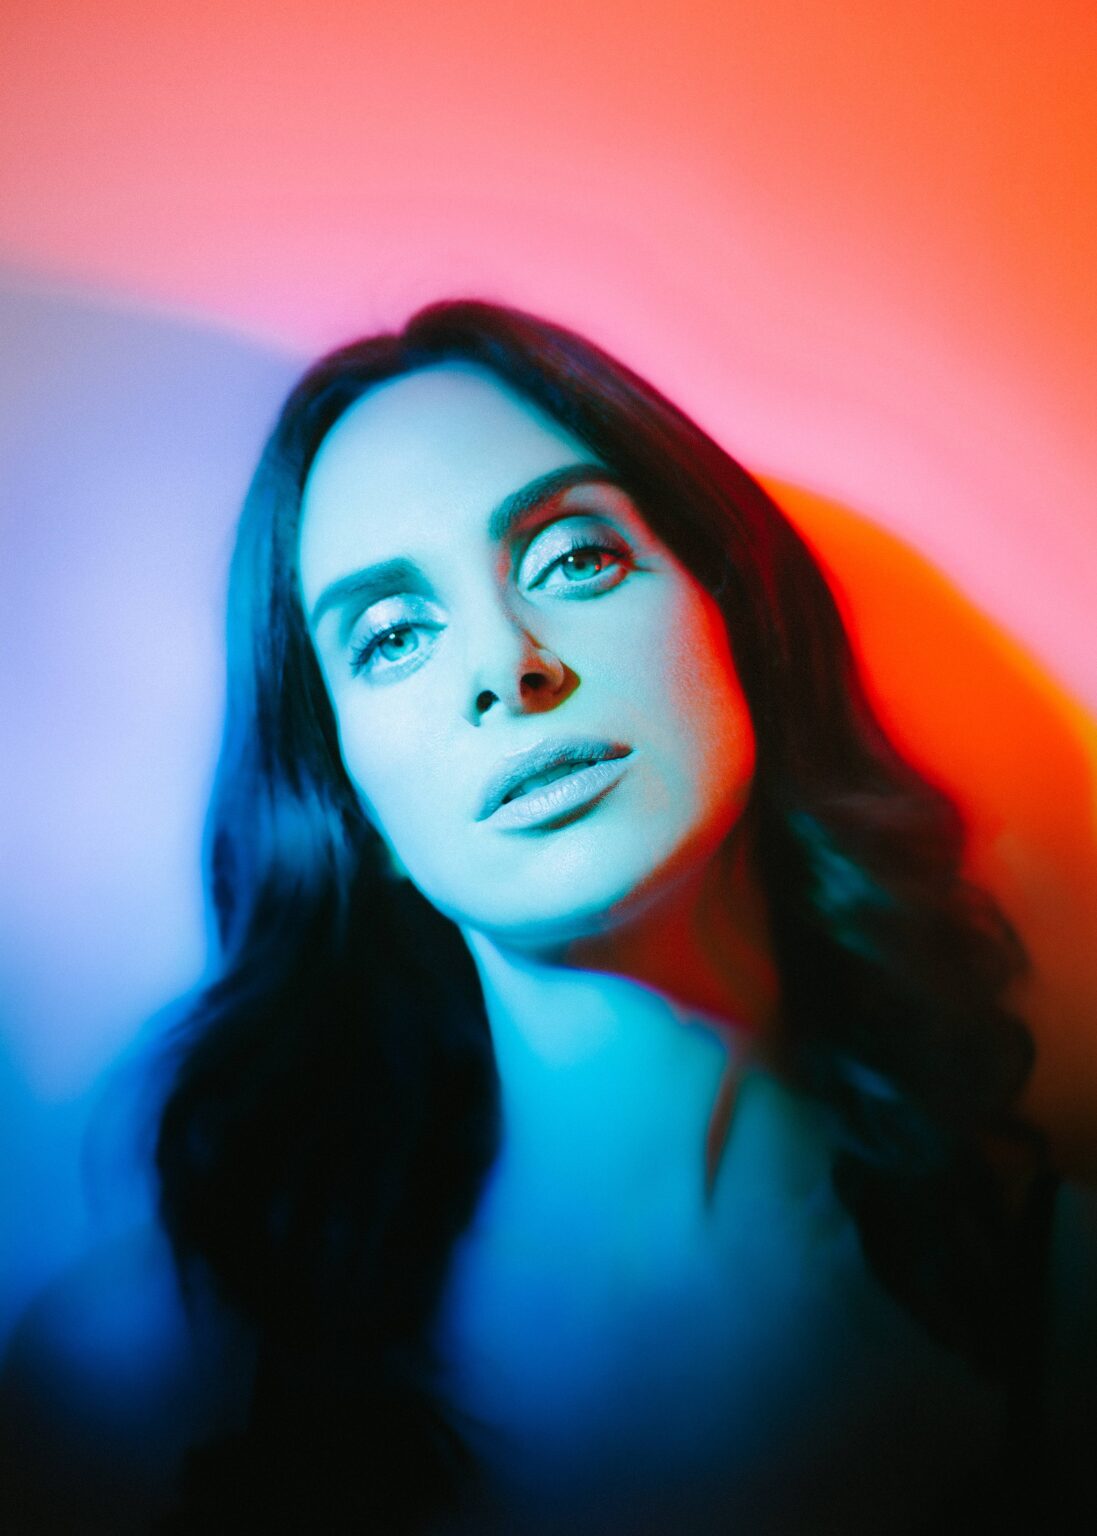 Irish Artist Blooms Is Back With New Single - Focus